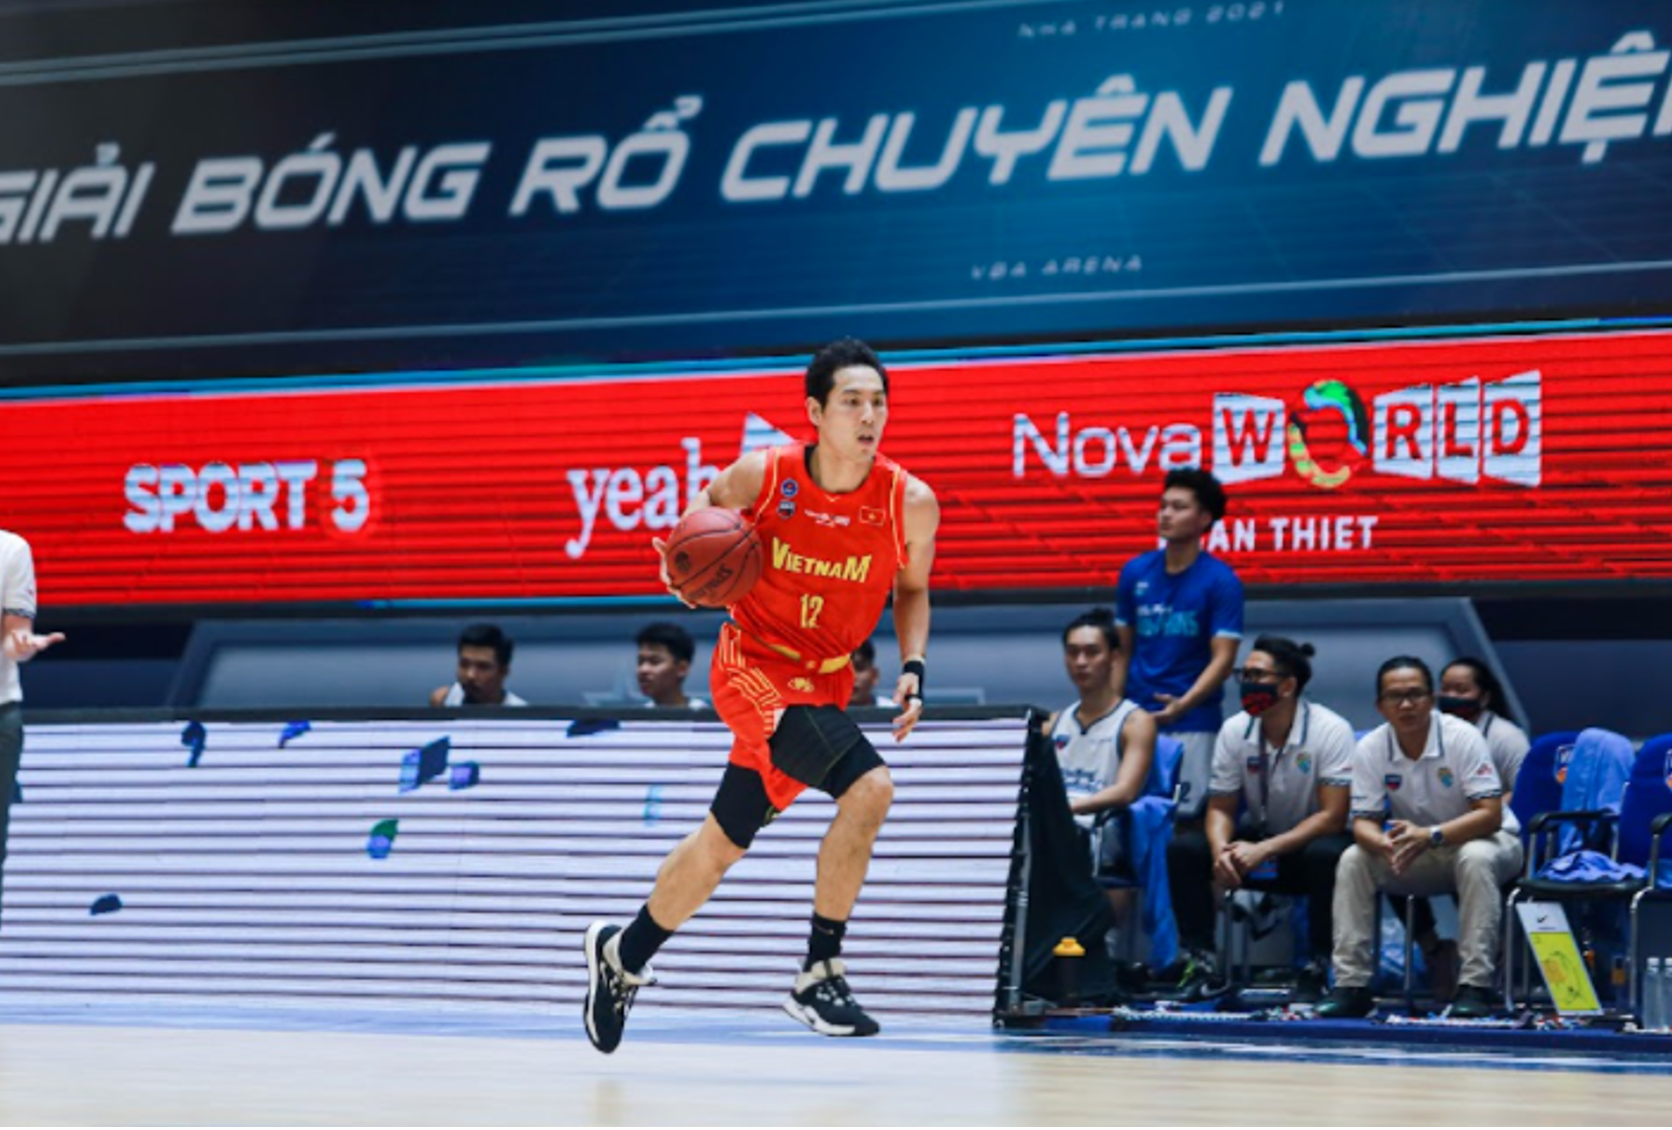 The Vietnamese national basketball team’s Justin Young dribbles the ball during a game at the VBA-NTU Arena. Photo: VBA